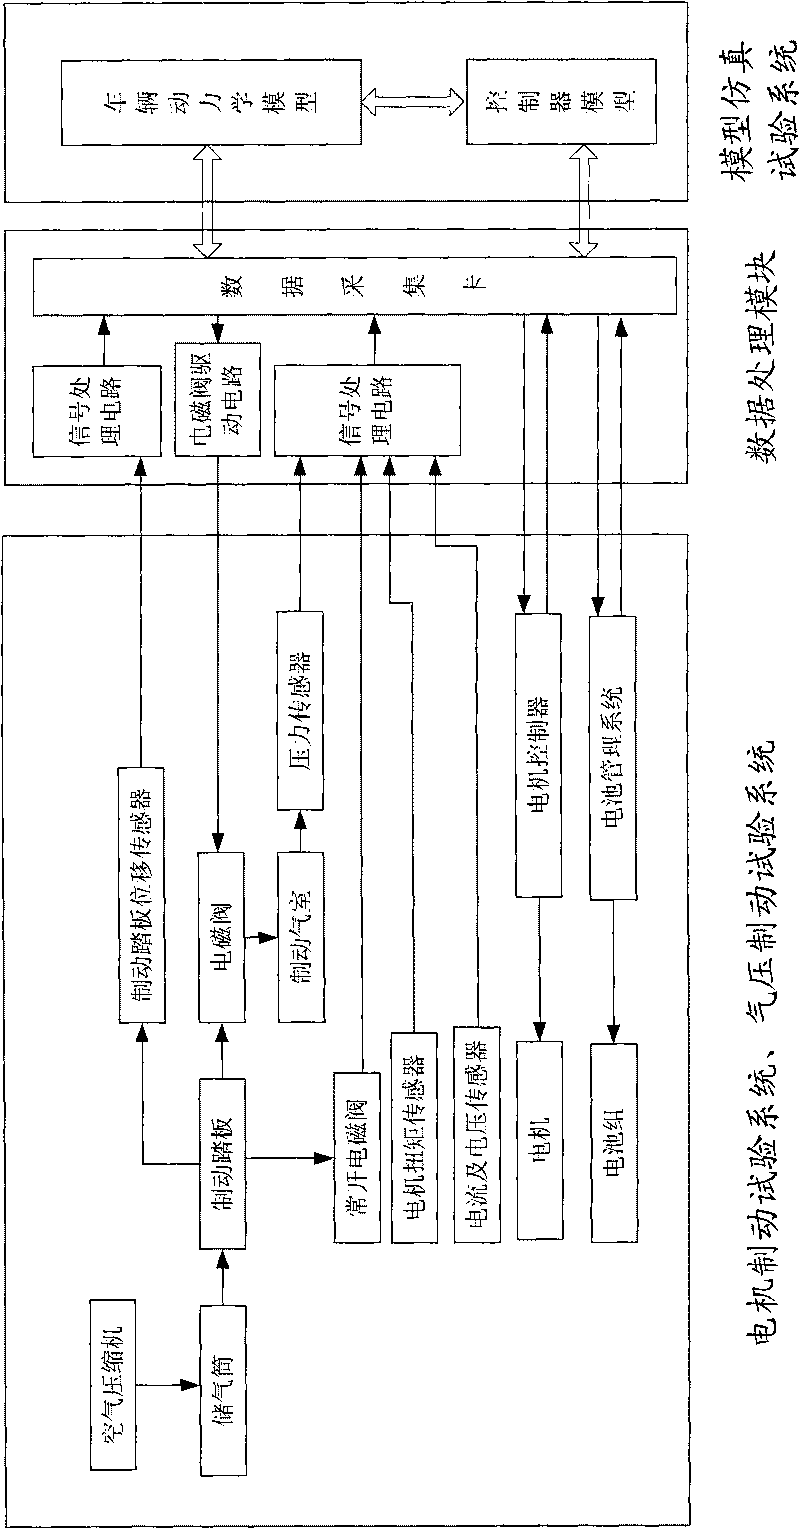 Test bed of air pressure and regenerative braking coordinated control system of hybrid electric bus